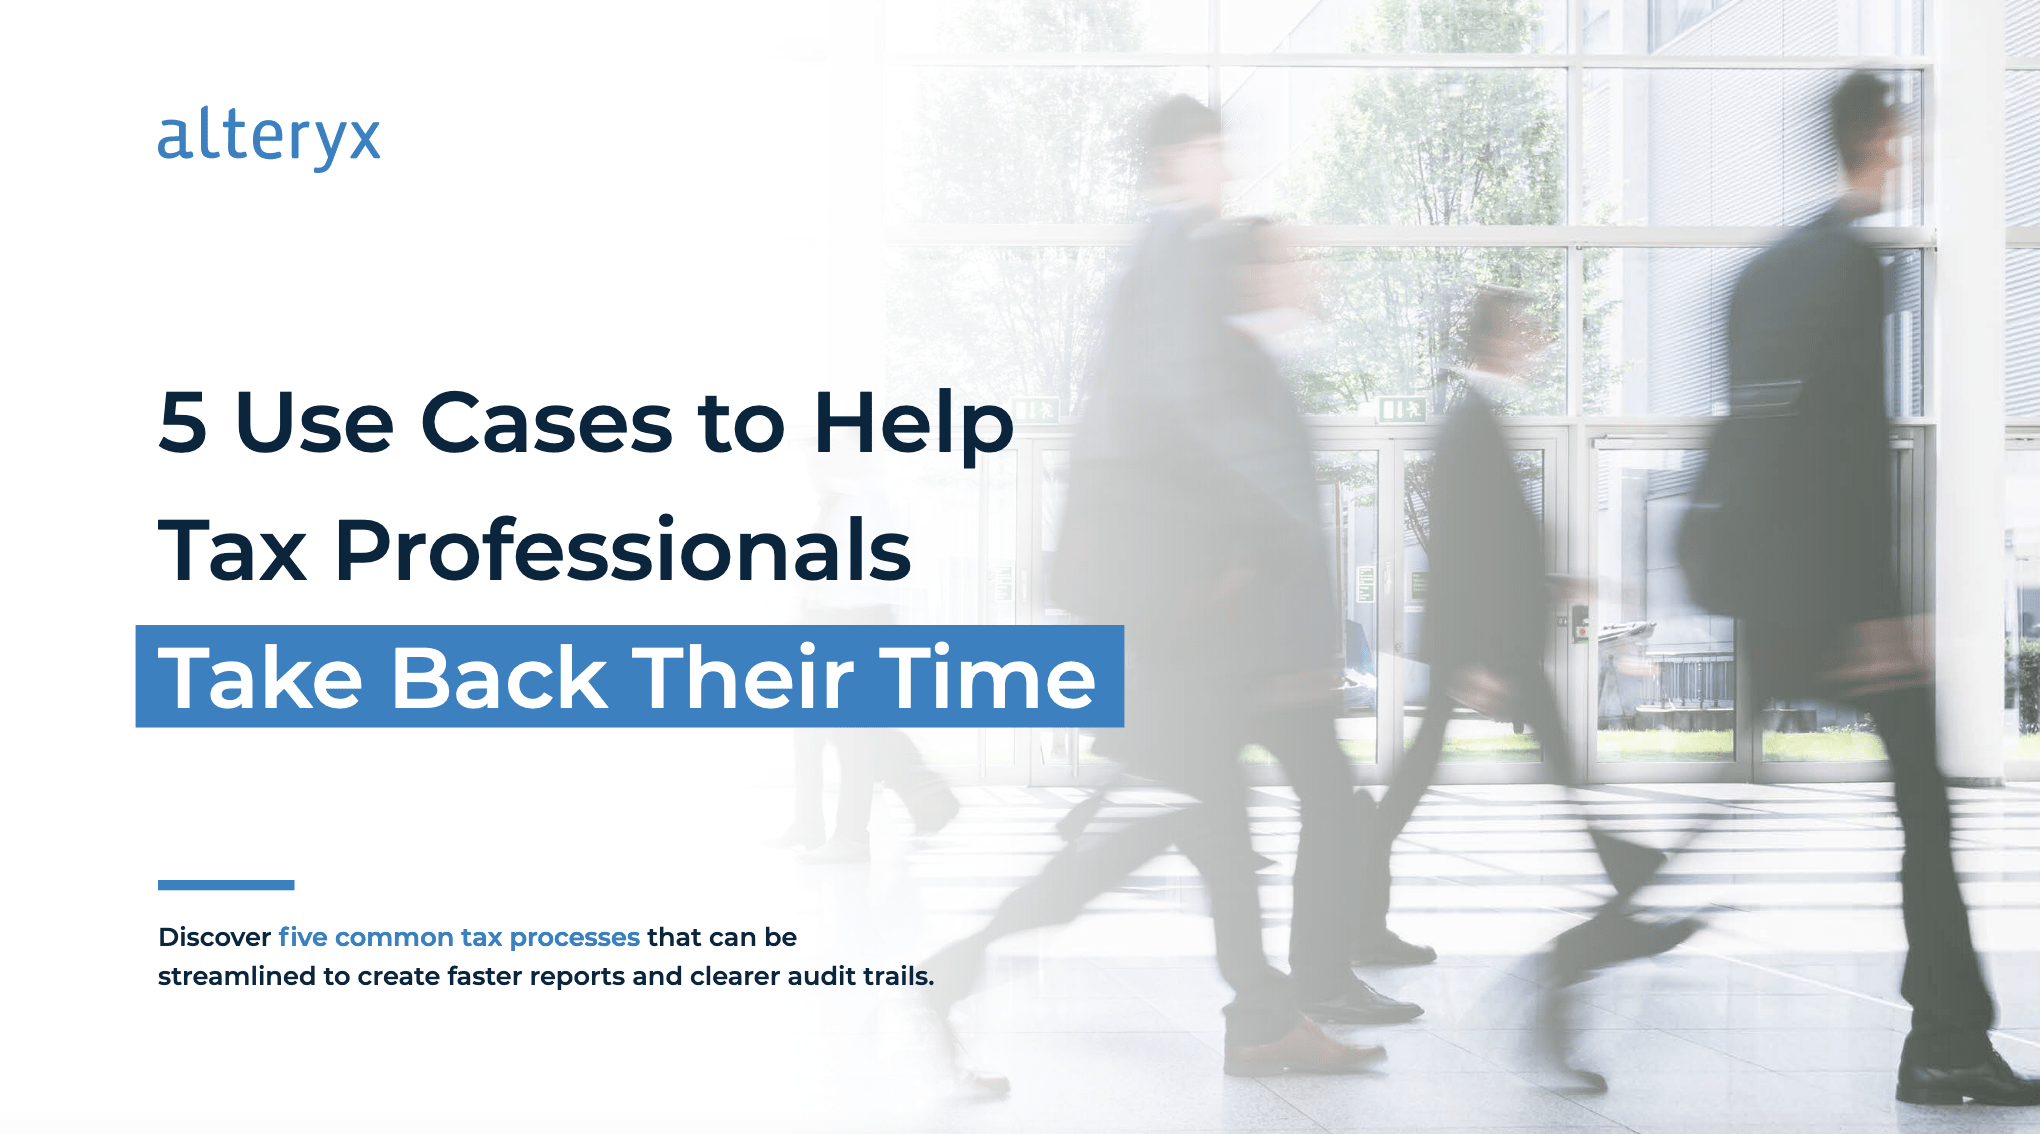 5 Use Cases  - 5 Use Cases to Help Tax Professionals Take Back Their Time